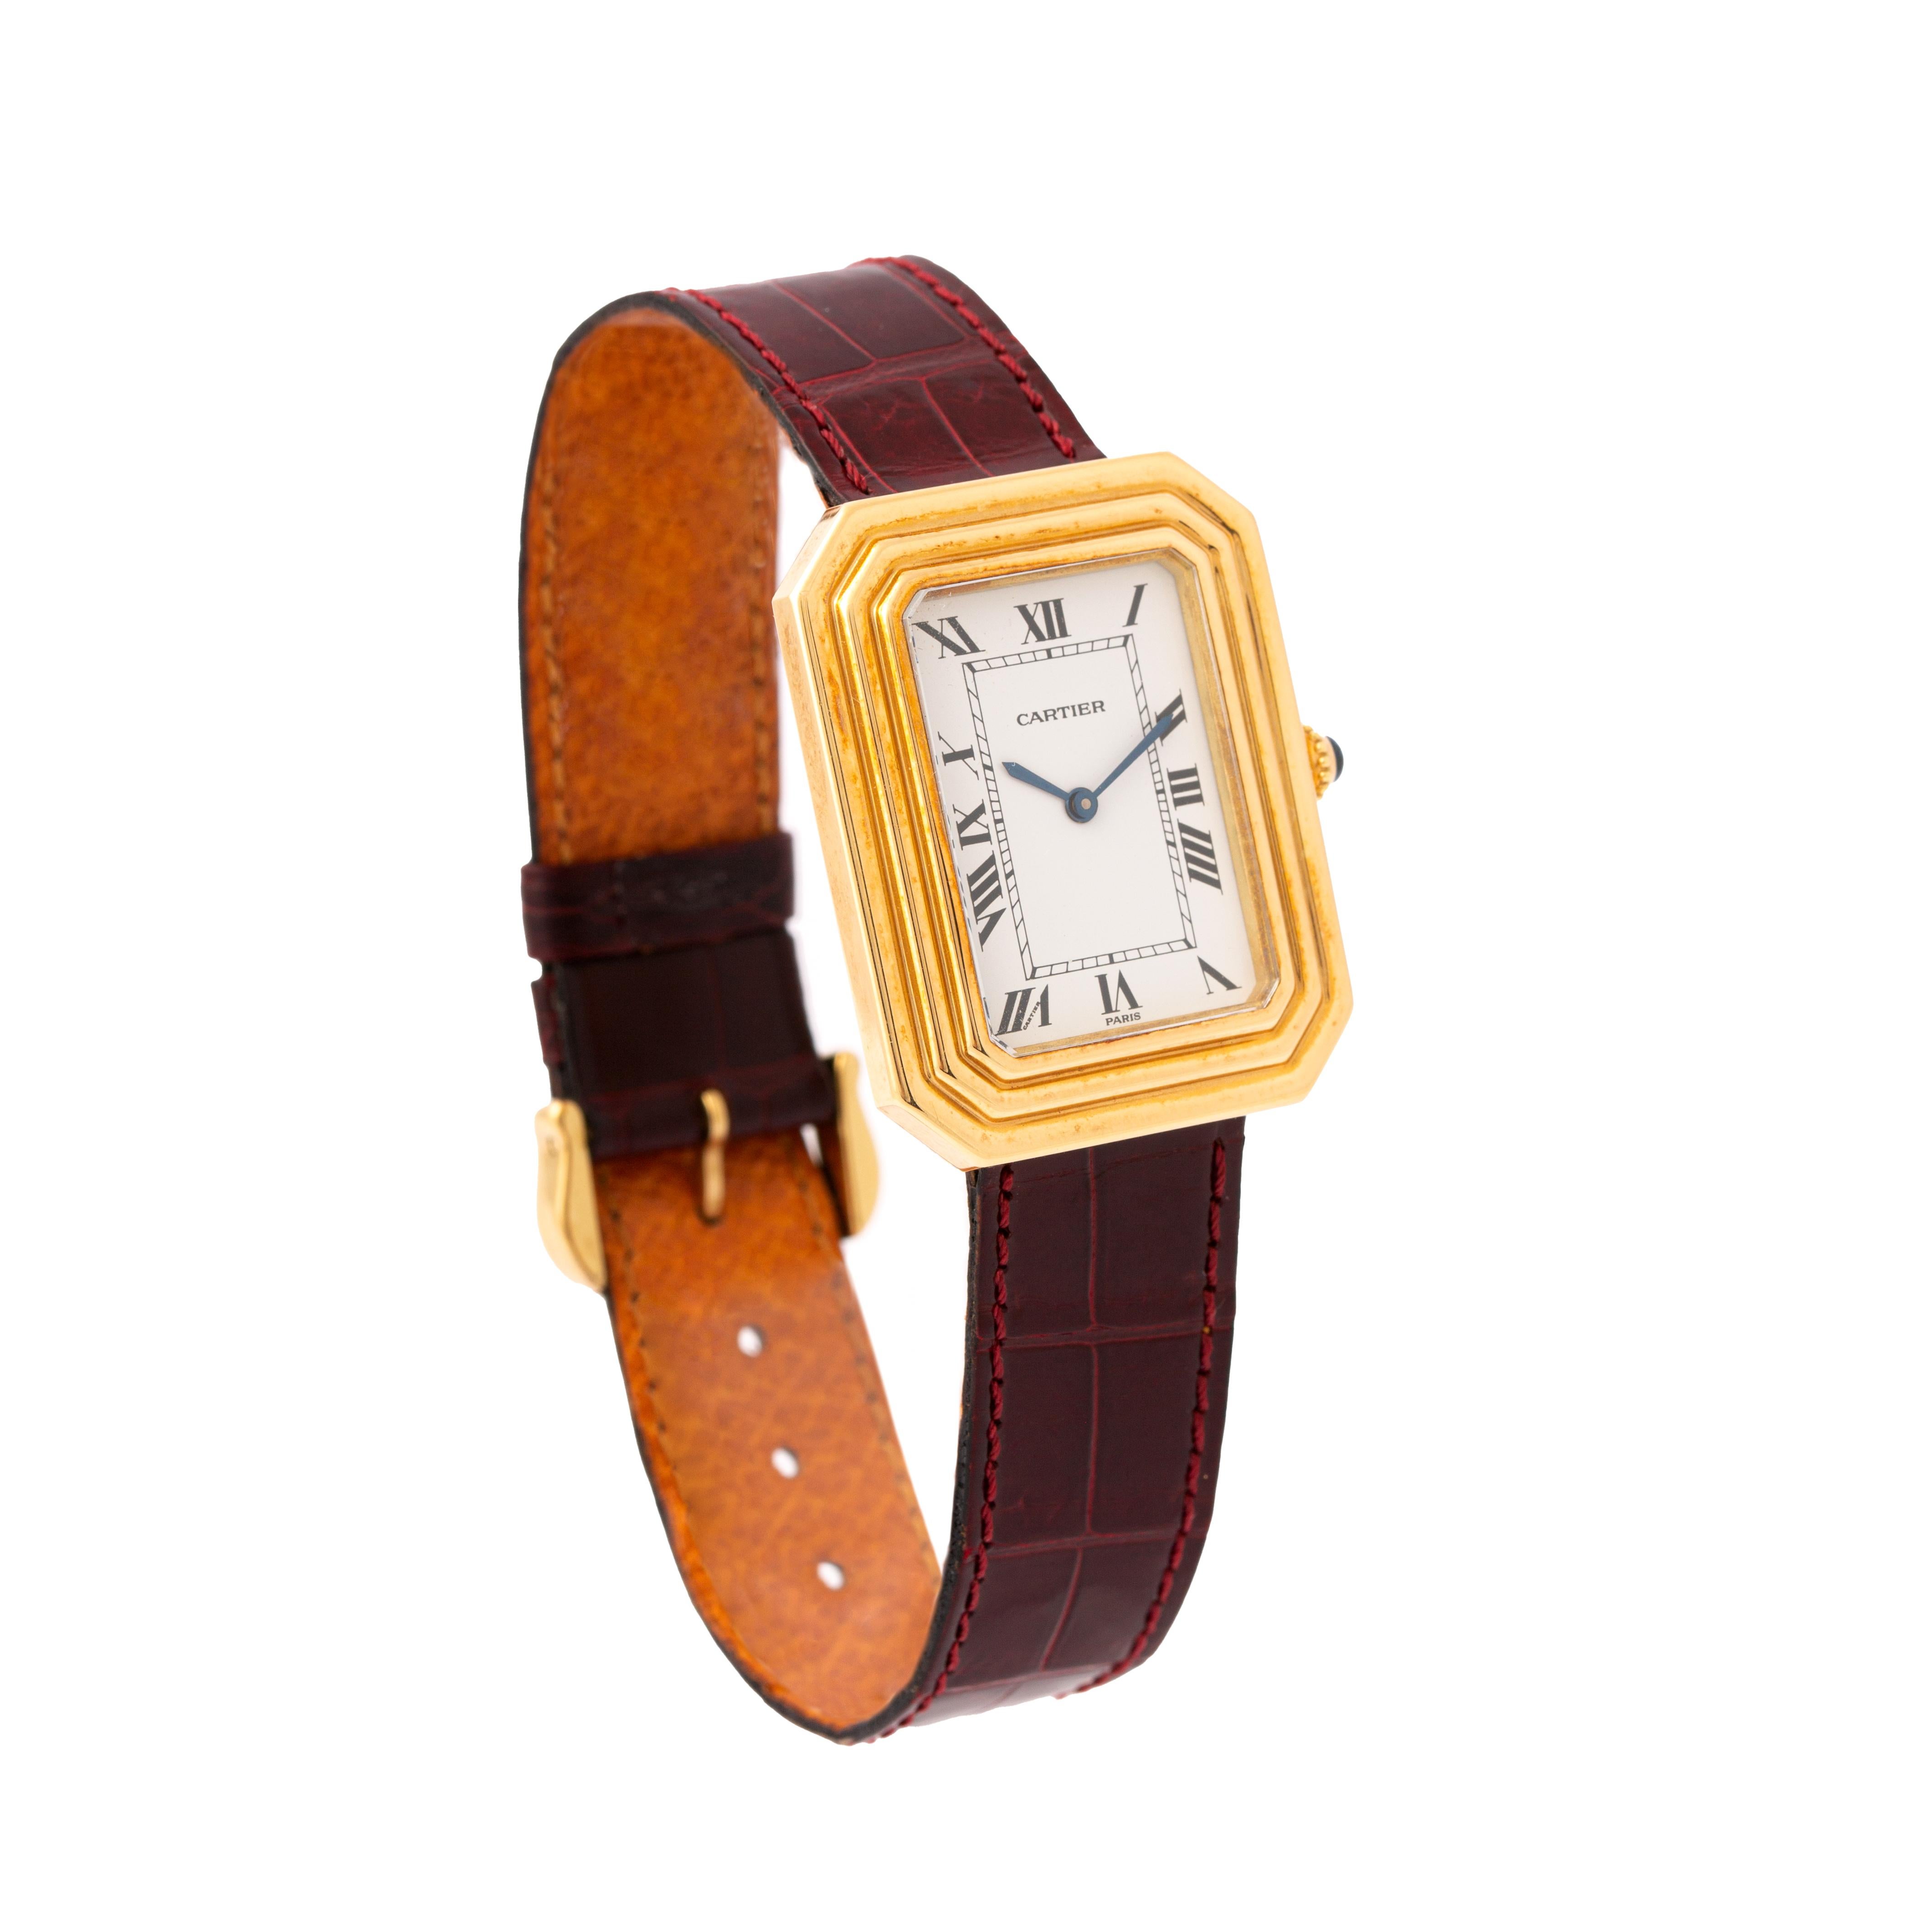 Cartier fine 18K yellow gold rectangular manual winding wristwatch.
Le Must de Cartier bracelet with plated clasp.
Signed Cartier PARIS. French and Swiss Marks. Numbered 780960786.
Original Cartier Box and Document.

Size: 35 x 28 centimeters.